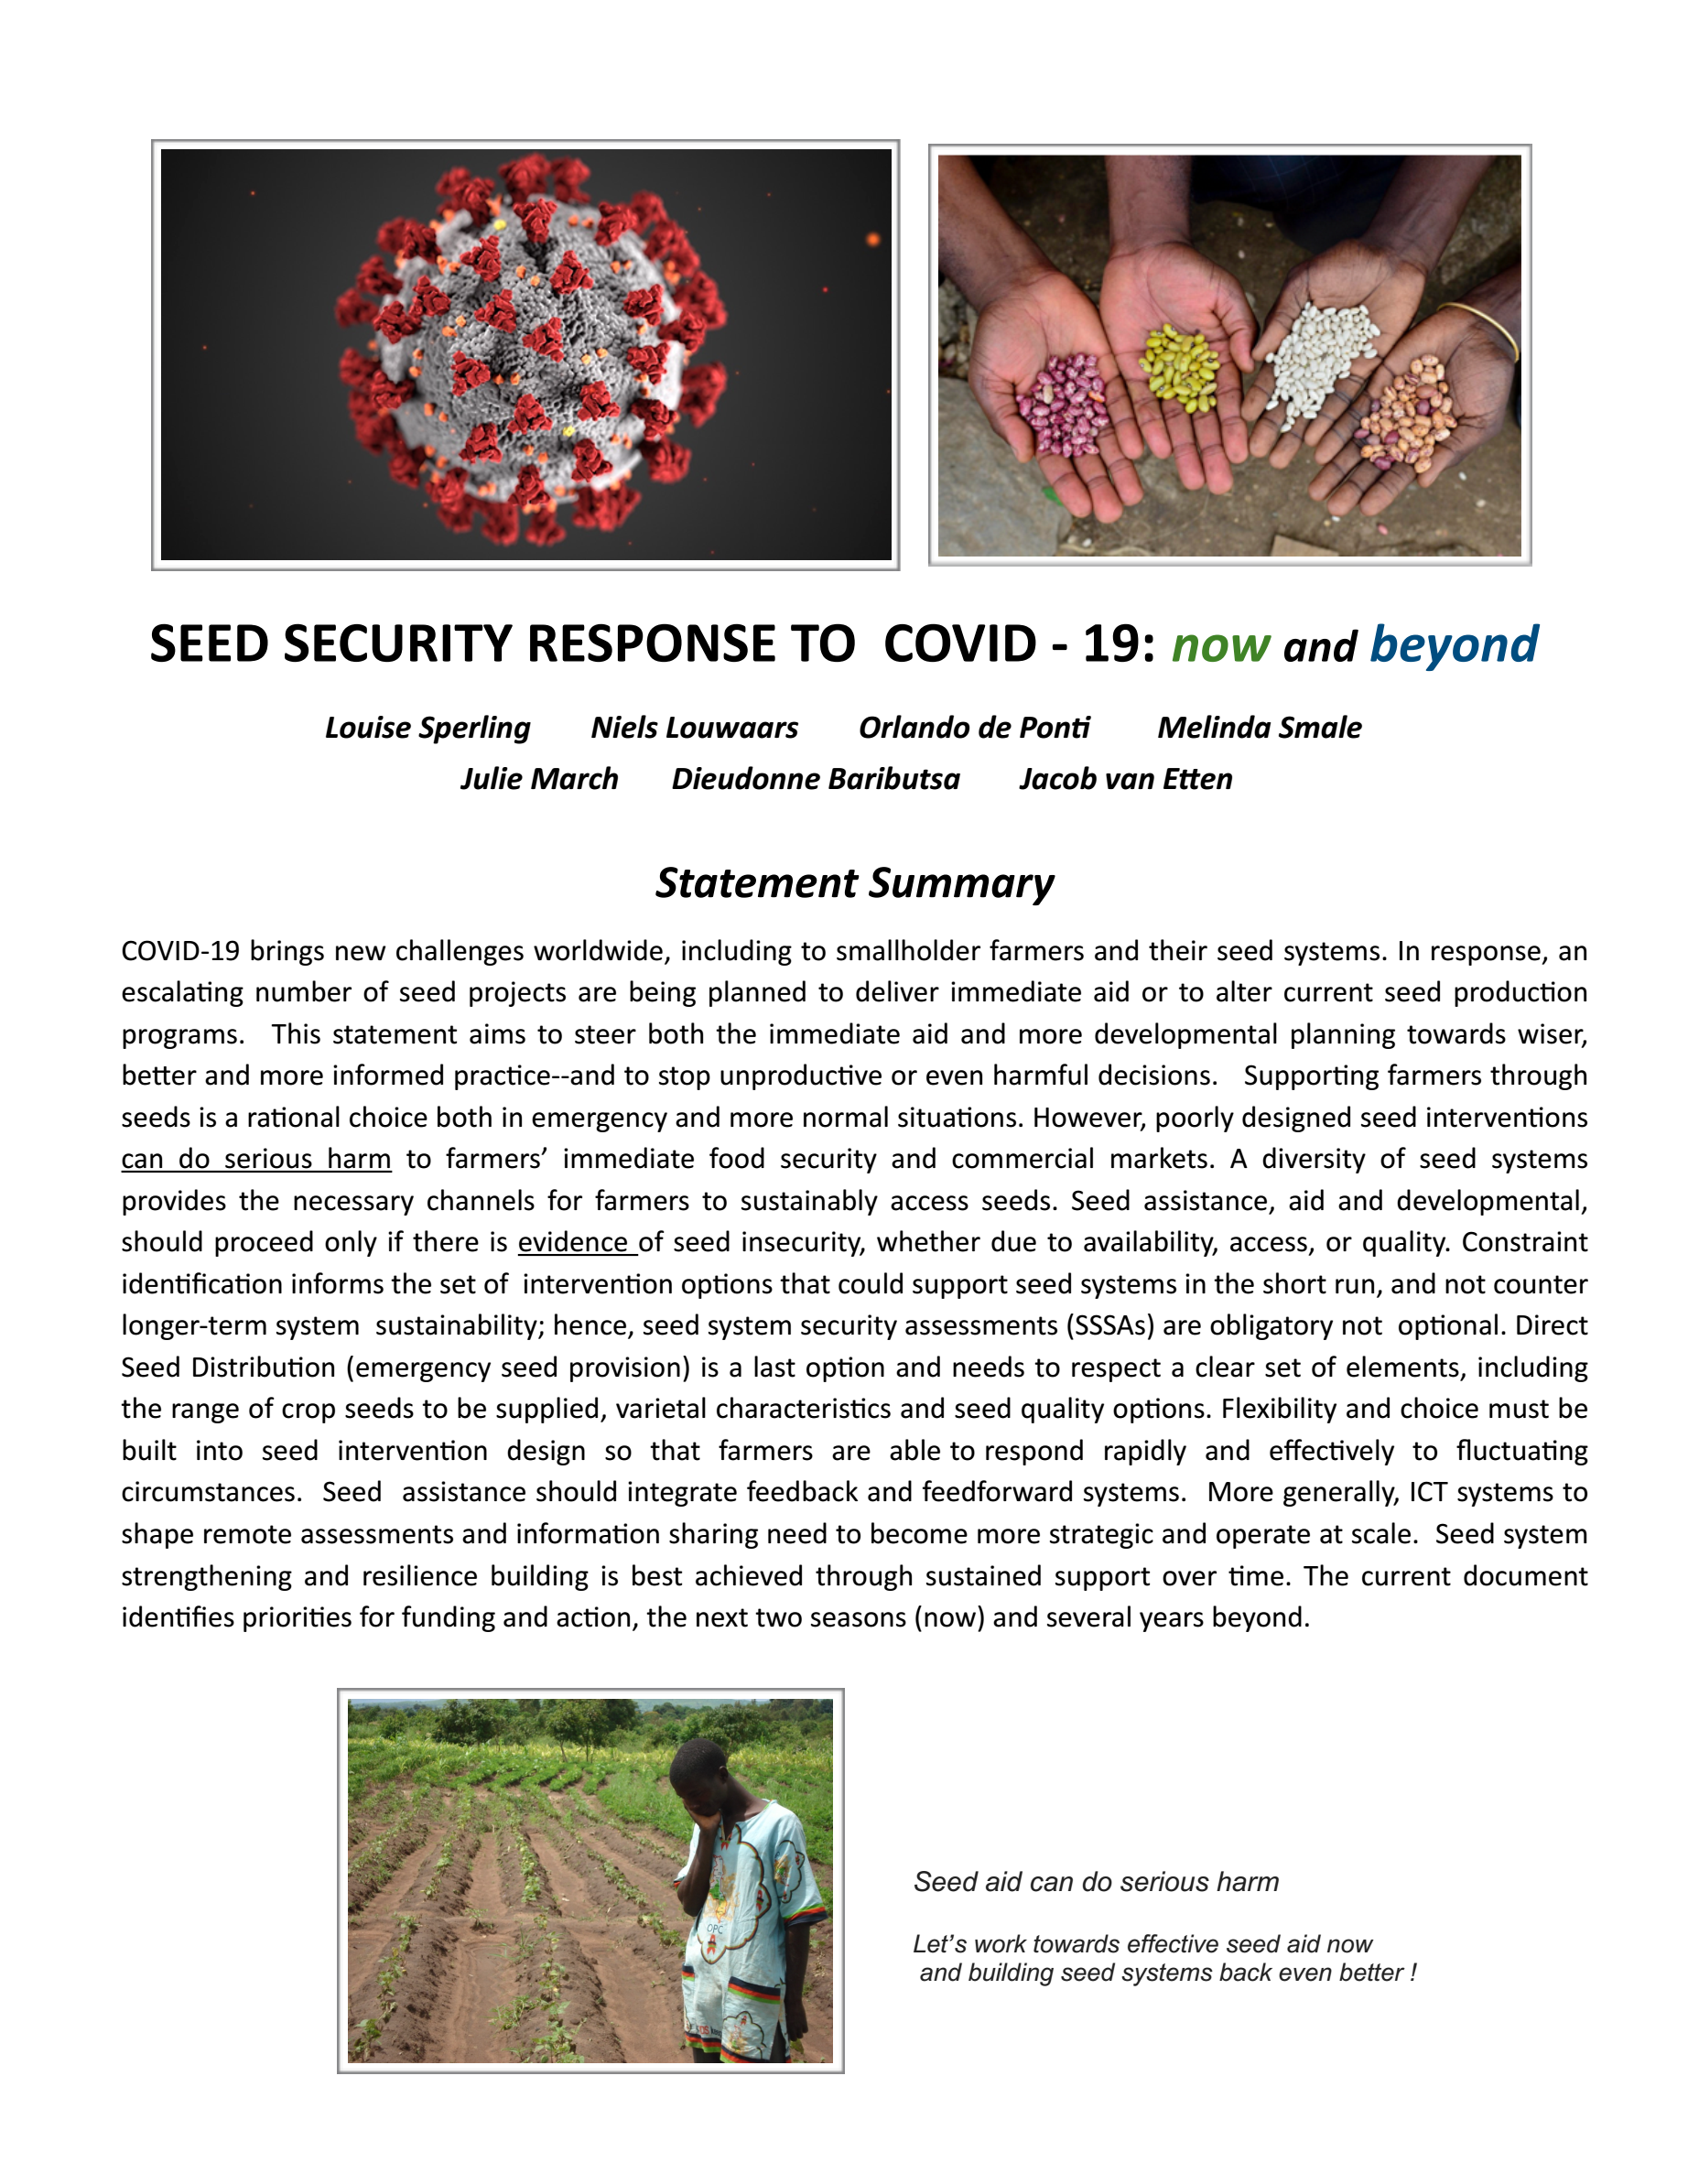 COVID19 and Seed Security